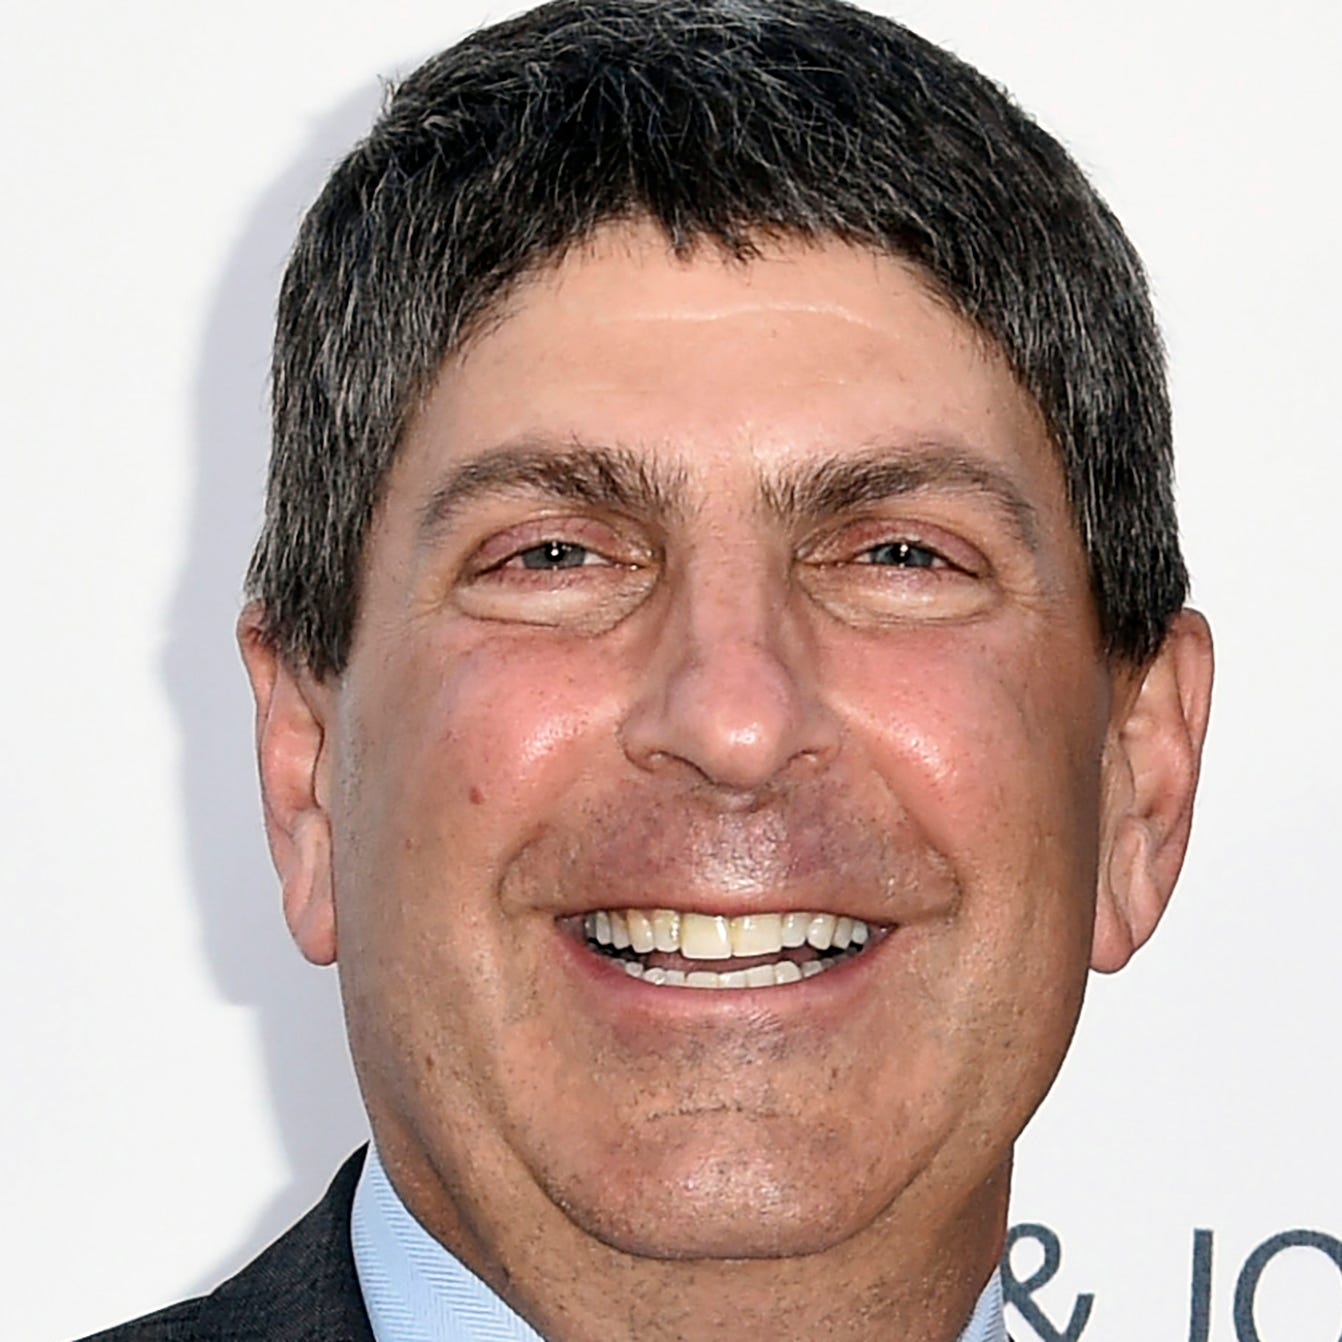 Jeff Shell poses for a picture at the LA Promise Gala in Universal City, California, in 2014. Shell, the chief executive of NBCUniversal, is departing the company after an investigation into inappropriate conduct.